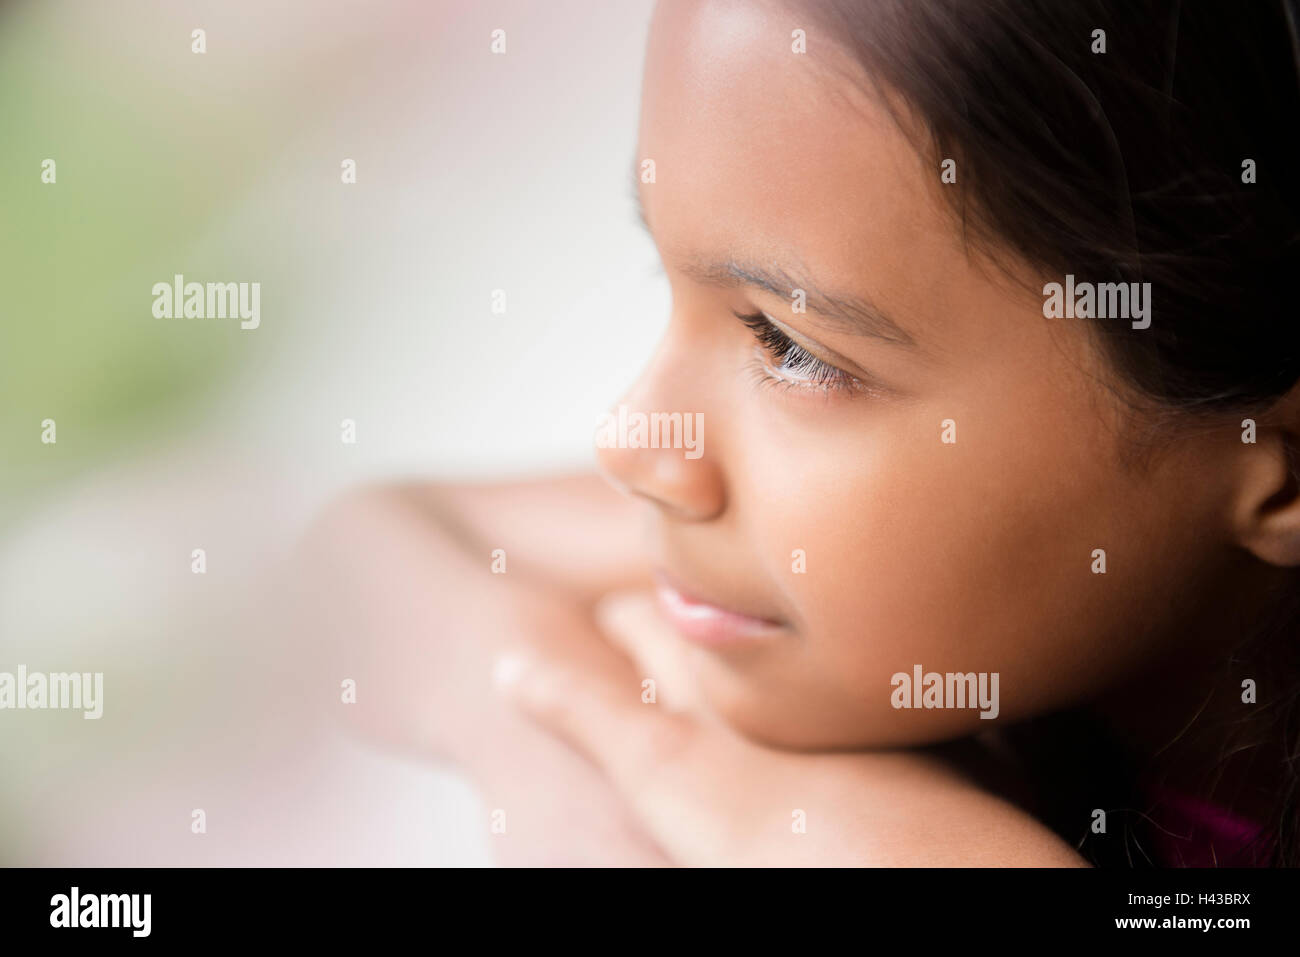 Pensive Mixed Race girl resting chin on hand Stock Photo